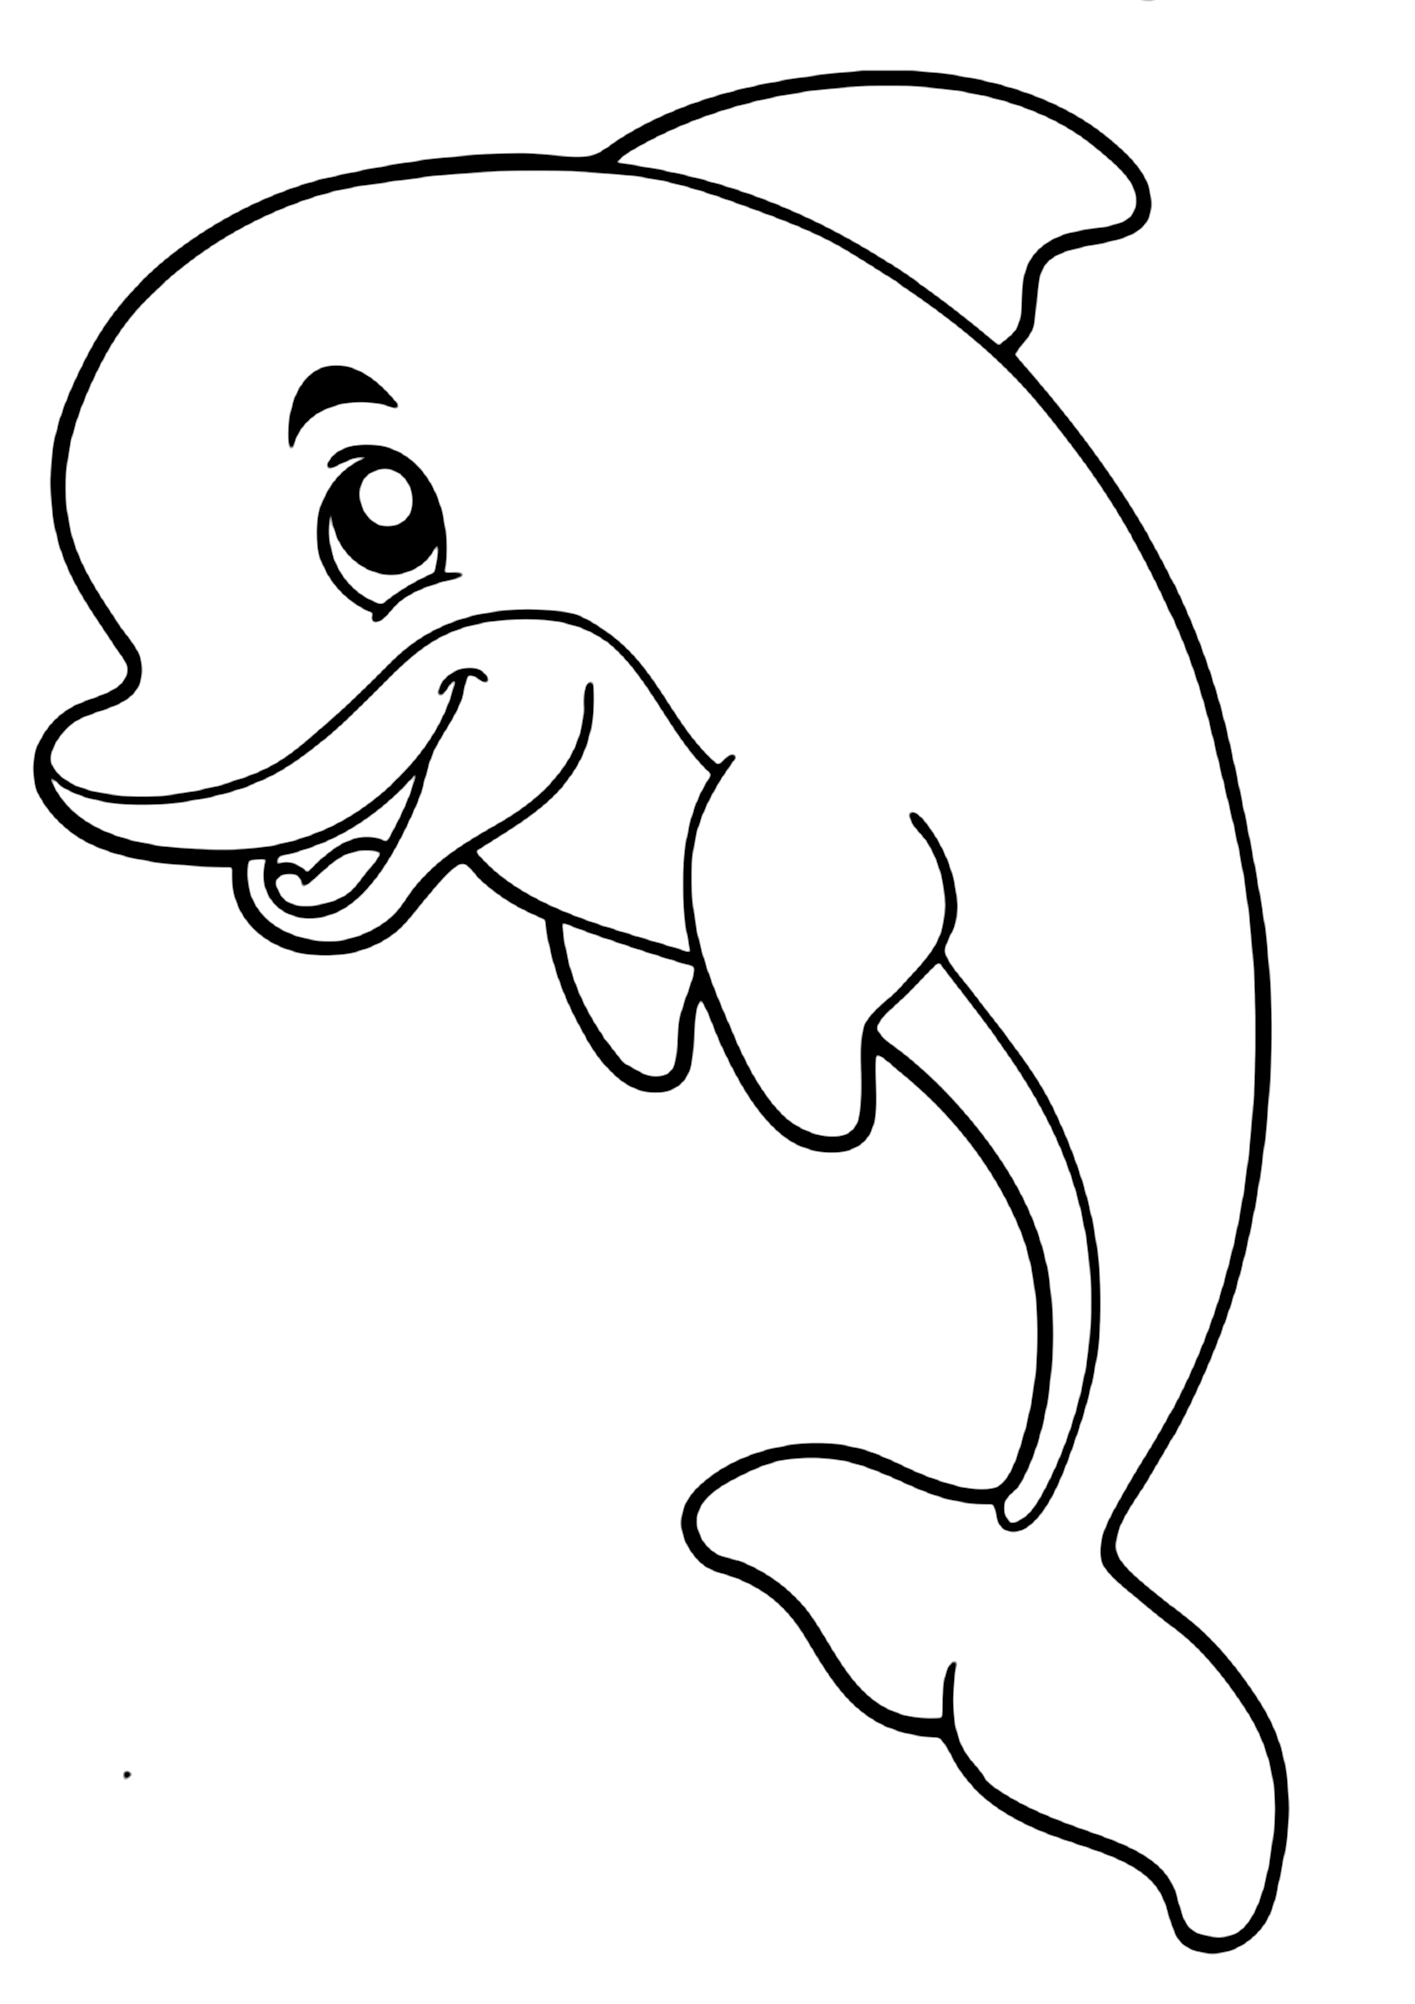 Easy and Cute Dolphin Coloring Pages